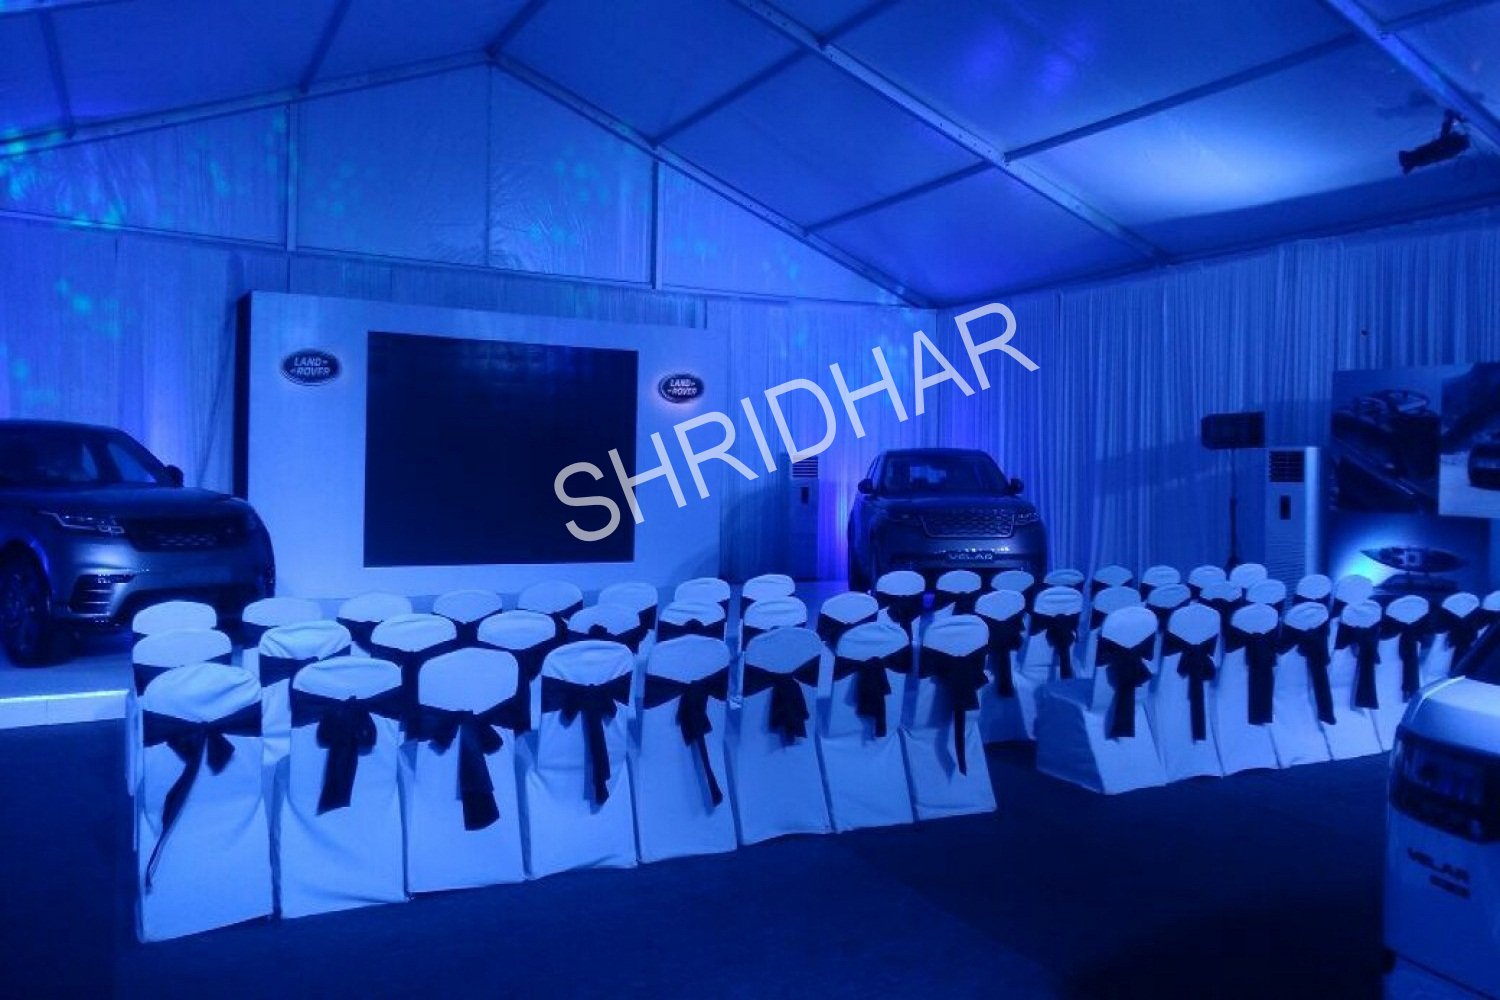 led lighting tents and chairs for rent for conferences in bangalore shridhar tent house